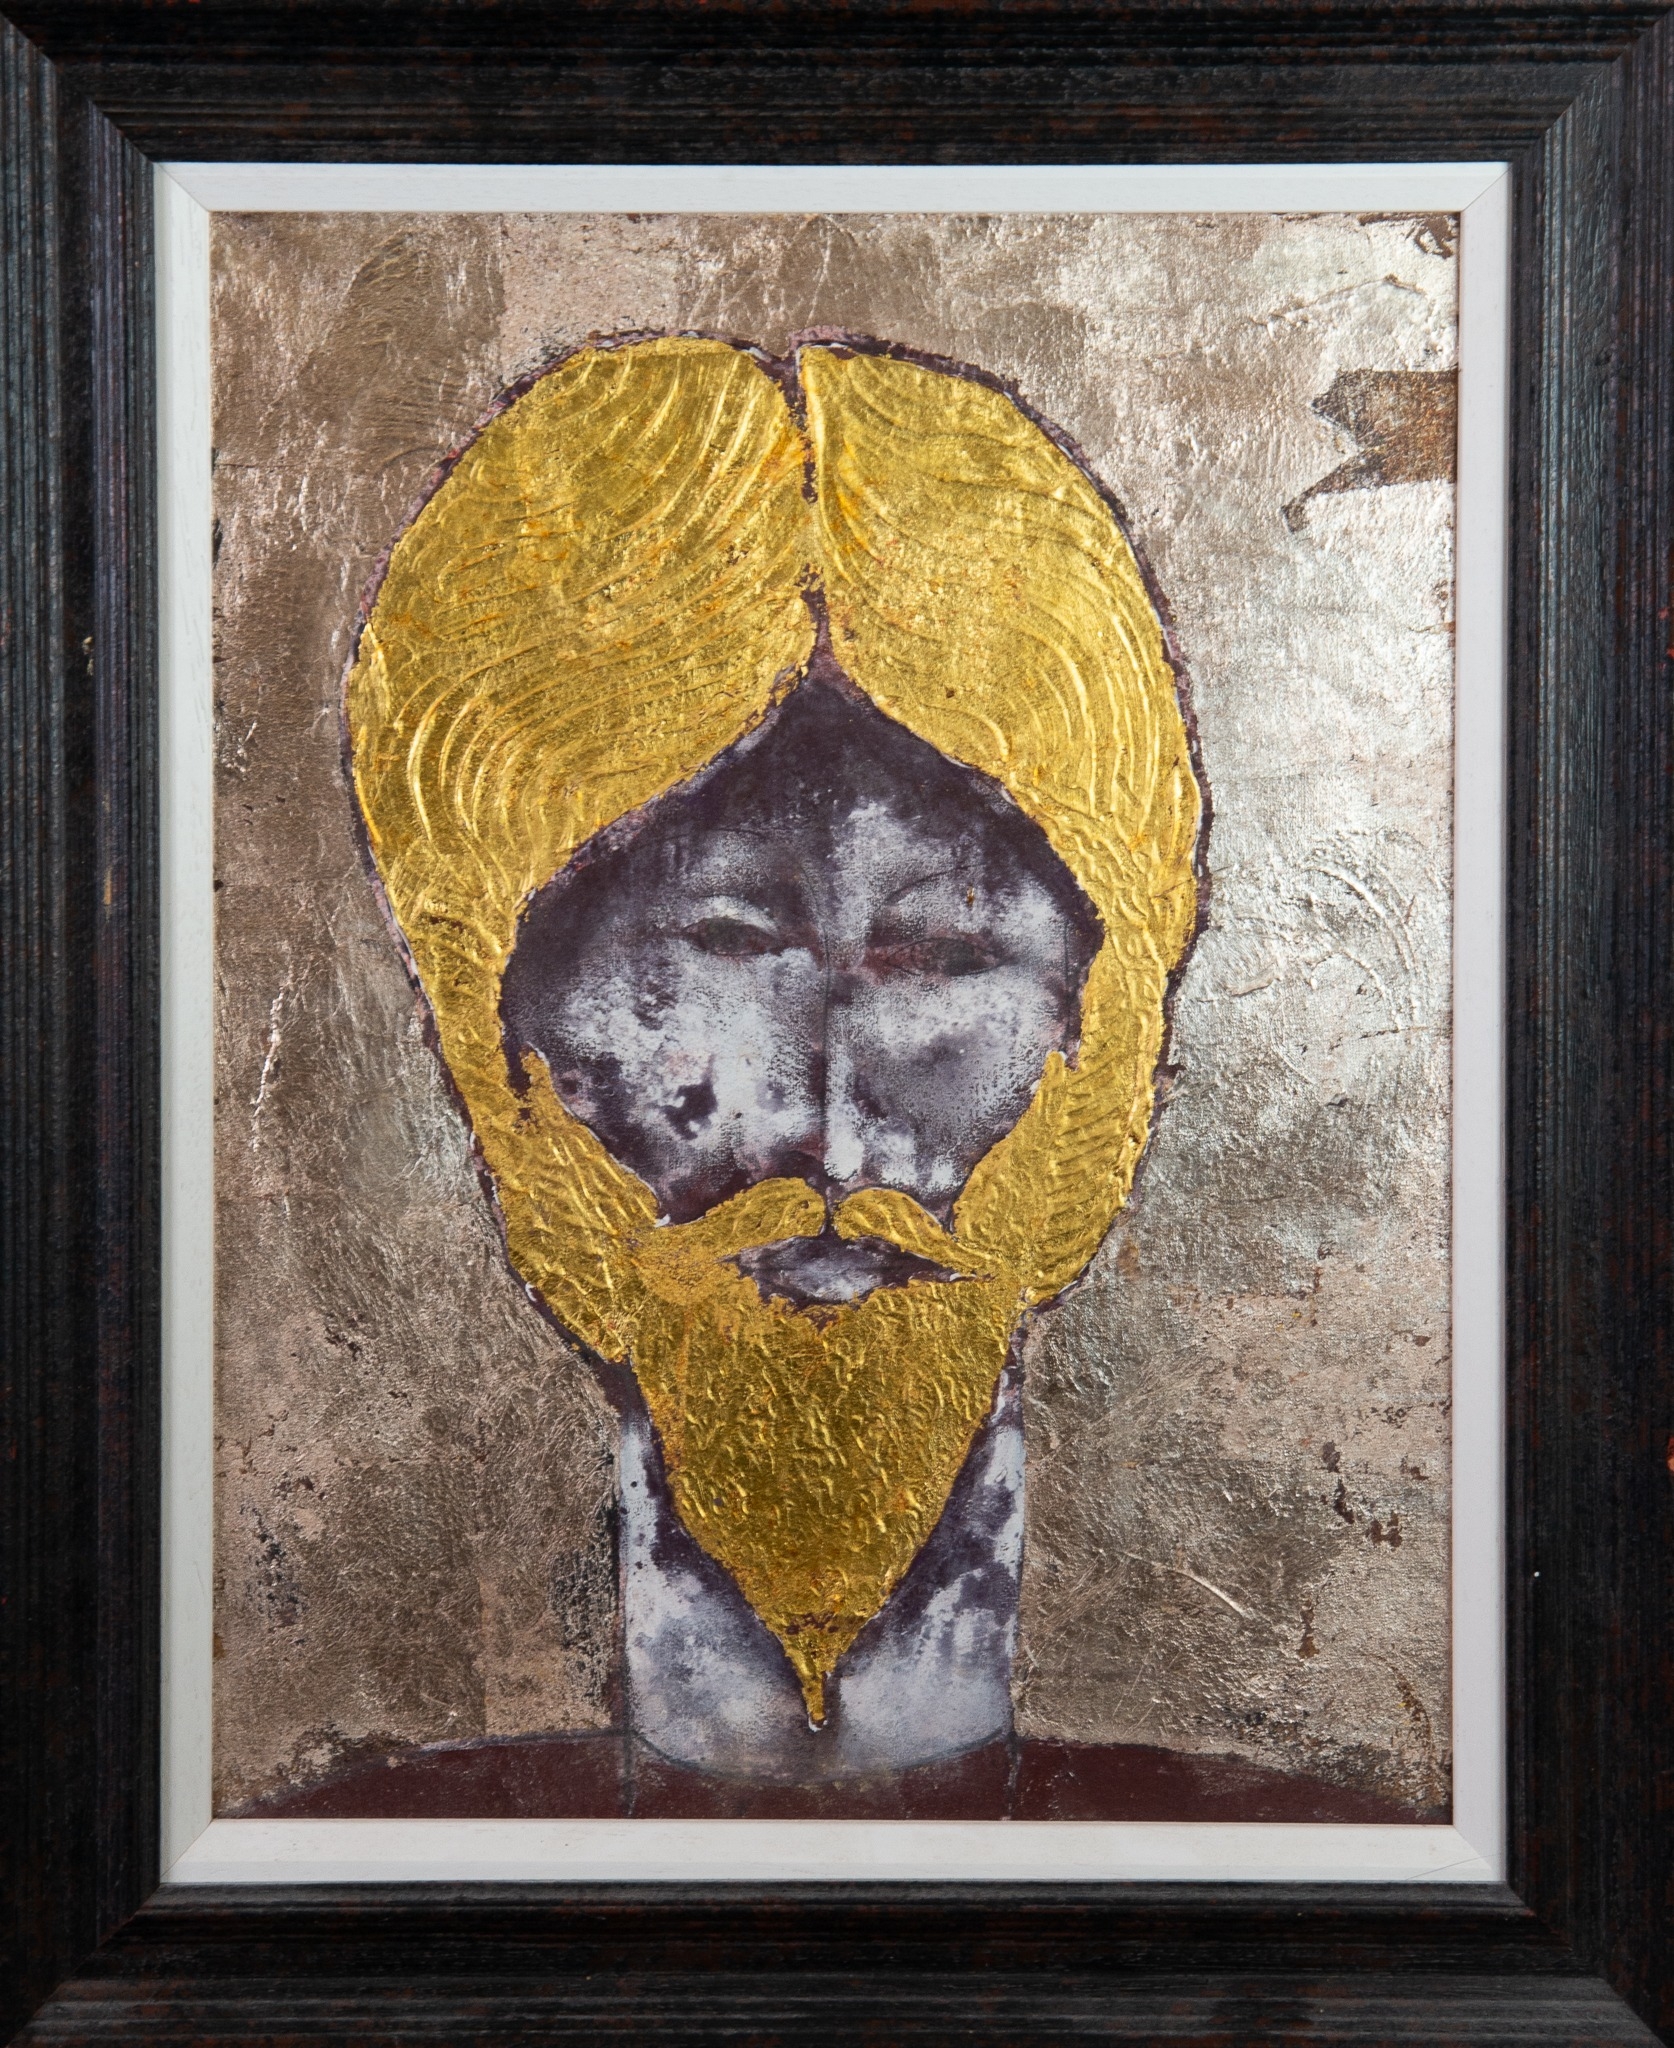 SAX BERLIN (21st Century) MIXED MEDIA ON CANVAS Isaac, head portrait Signed titled and dated 8-4- - Image 2 of 2